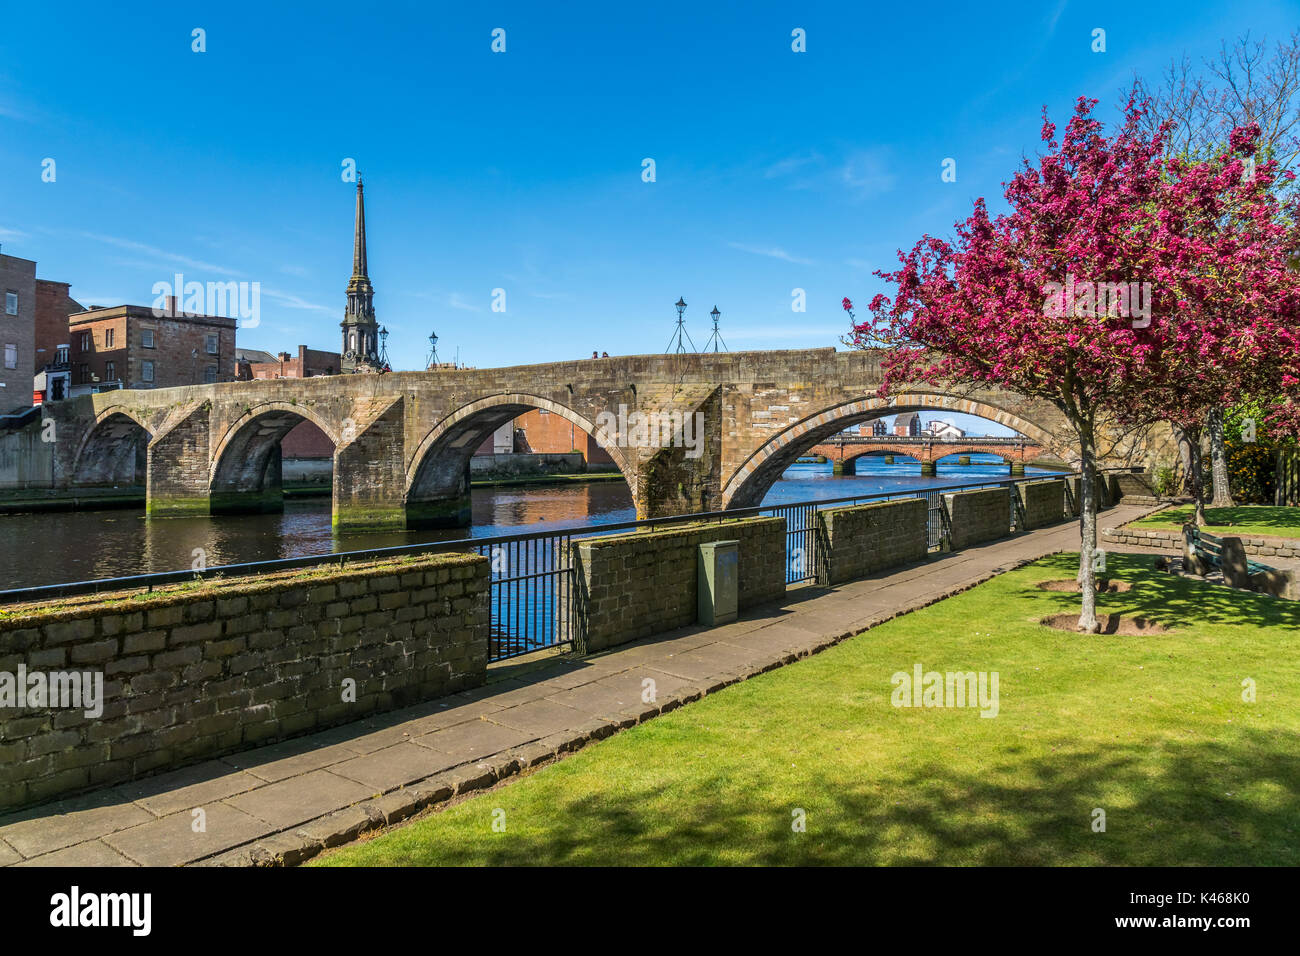 Ayr, Ayrshire, Scotland, April 22nd 2017. The old bridge of Ayr, or Auld Brig, which is now a pedestrian bridge crossing the River Ayr, with the river Stock Photo